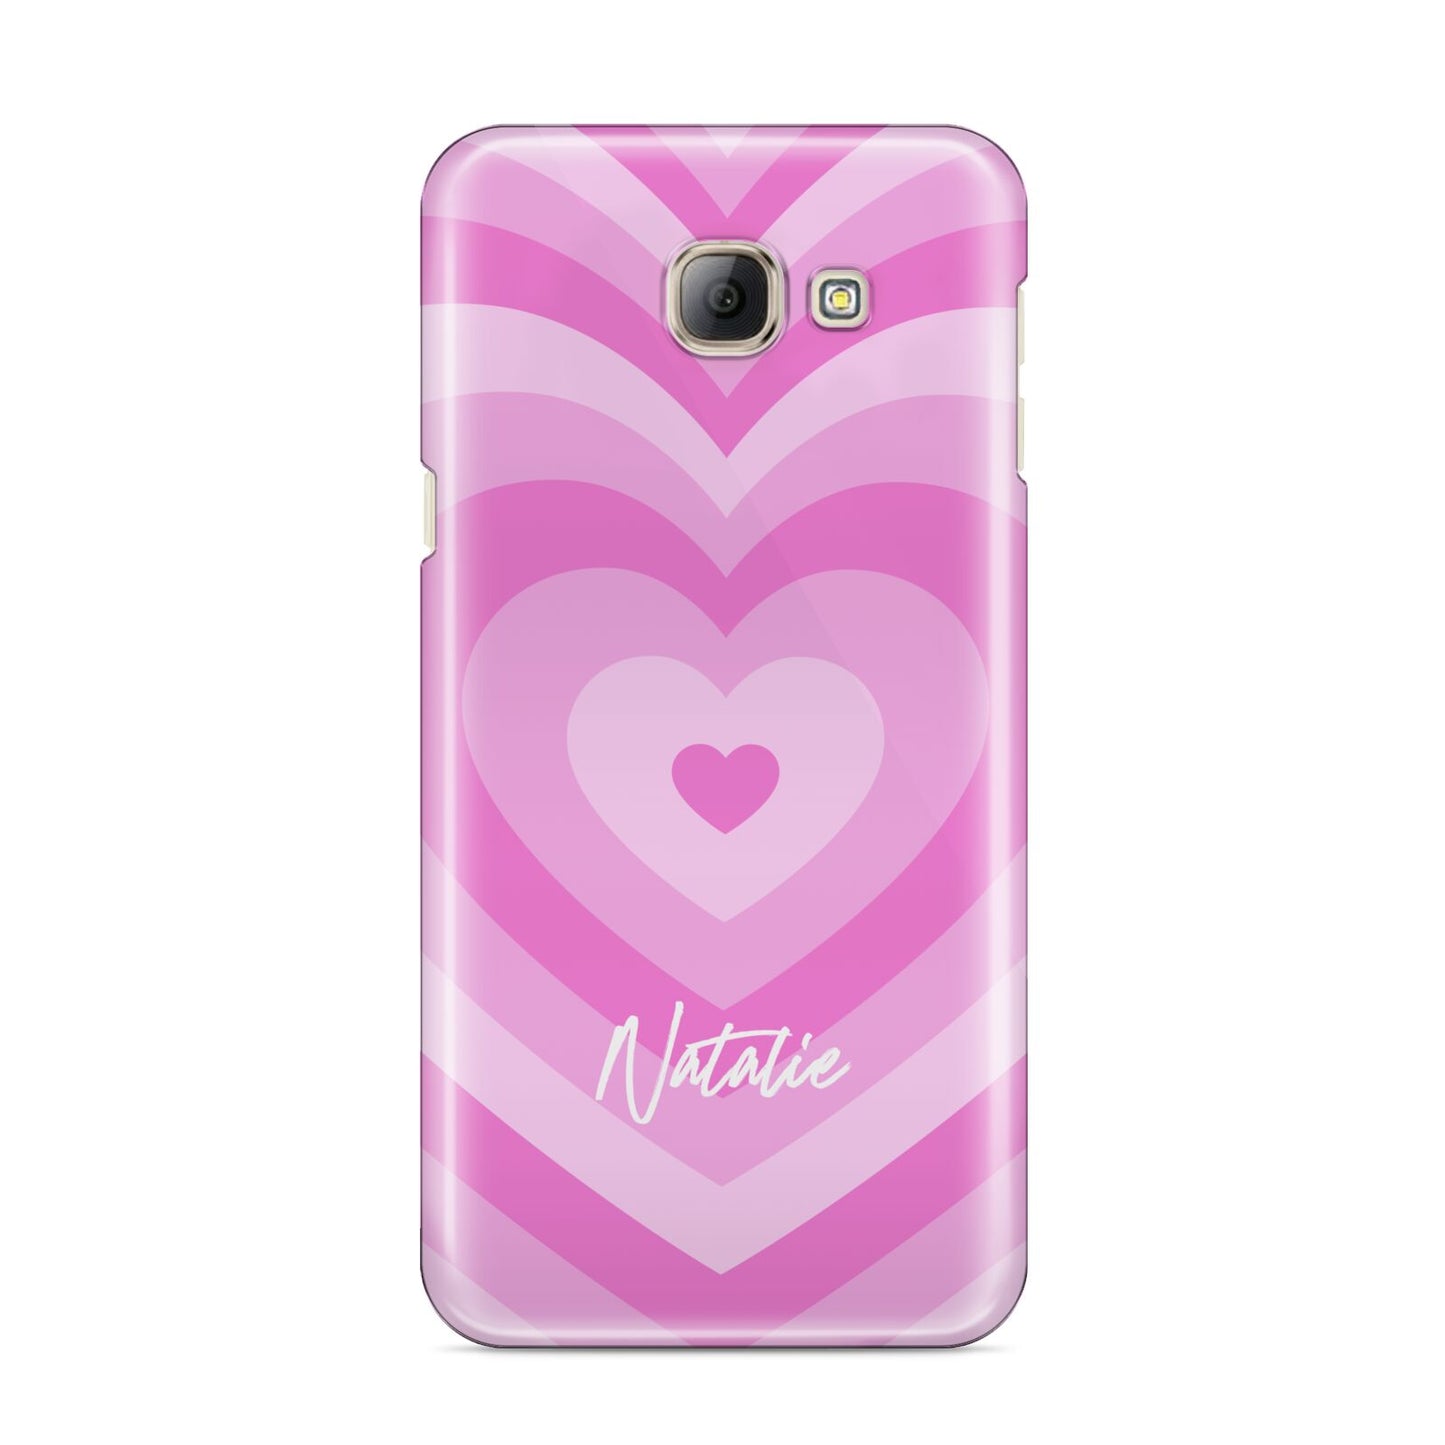 Personalised Pink Heart Samsung Galaxy A8 2016 Case